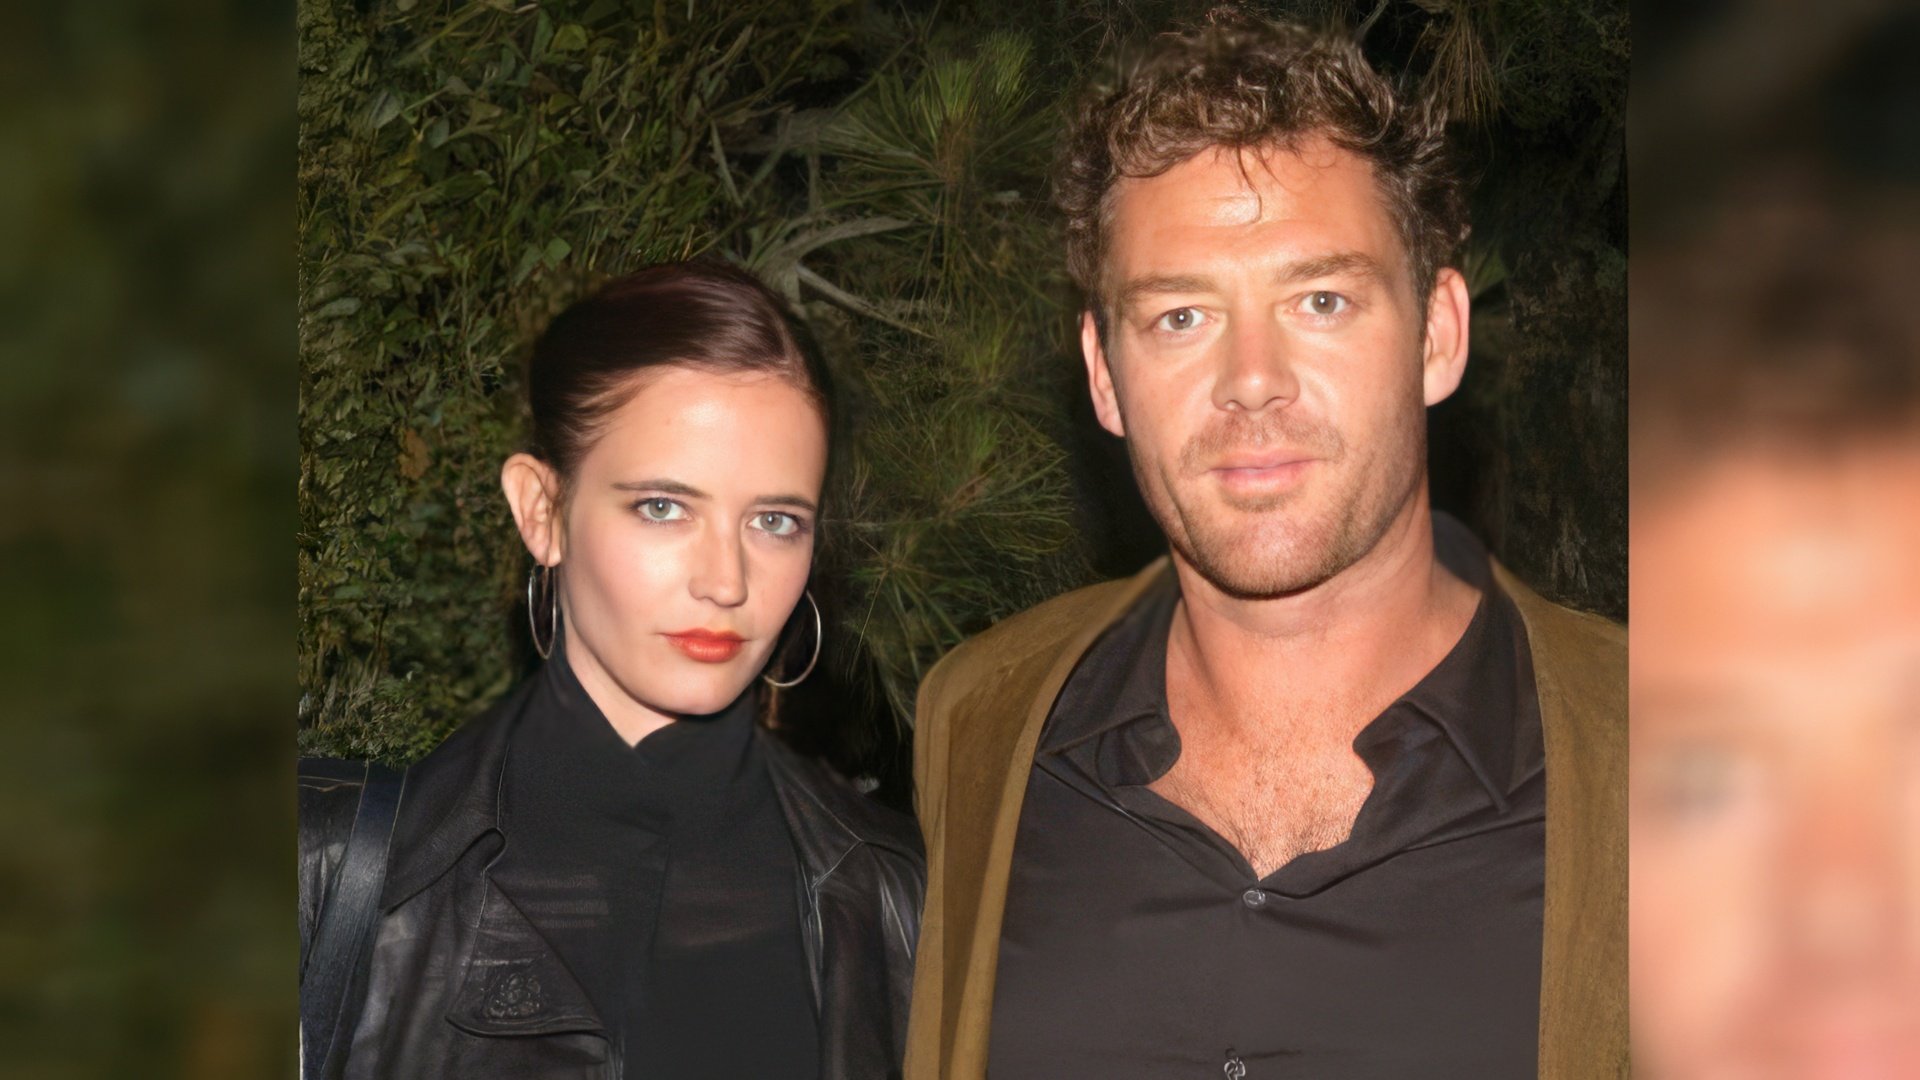 Eva Green has dated with Marton Csokas for almost 3 years